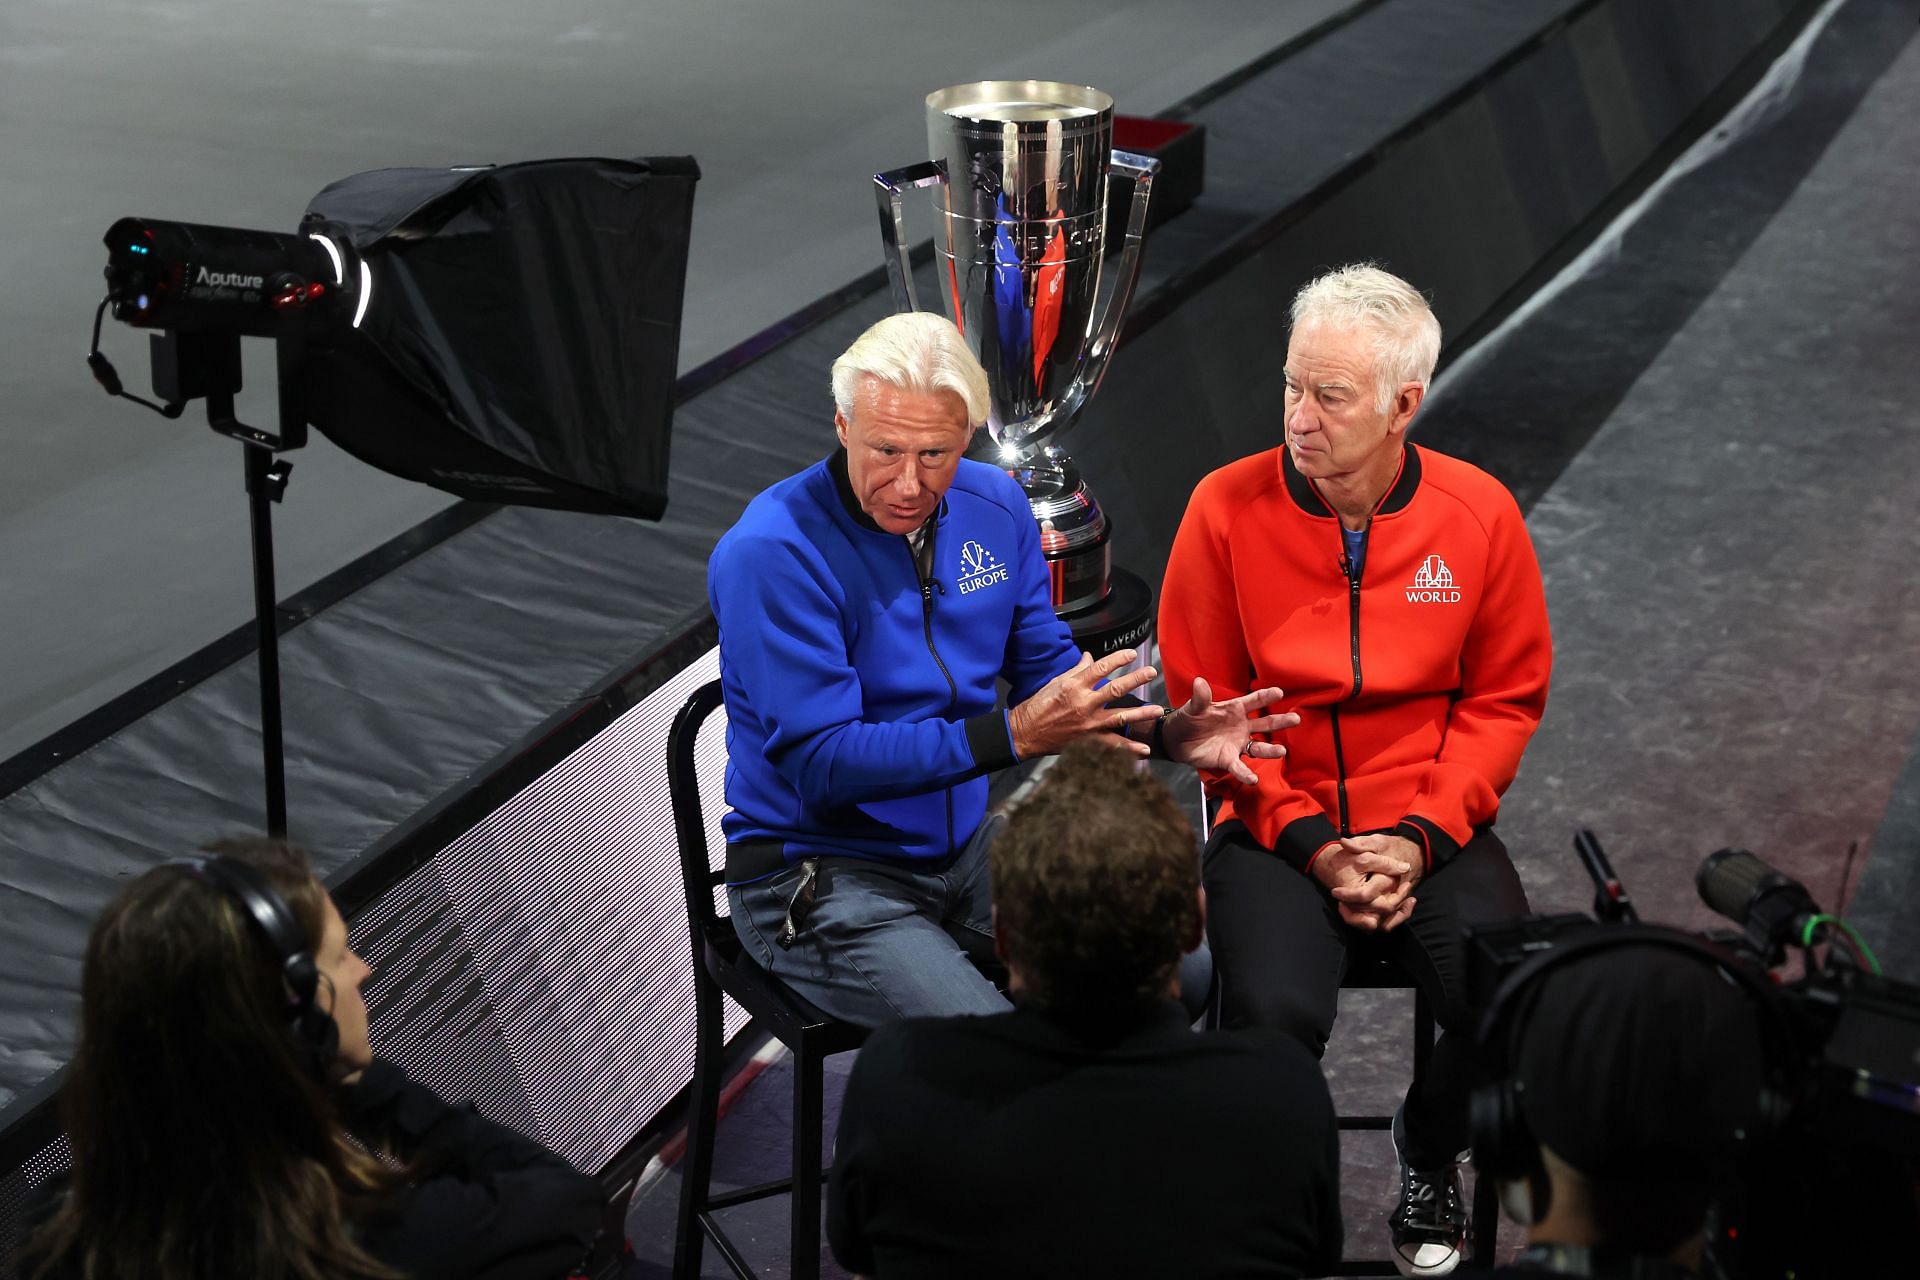 John McEnroe and Bjorn Borg at the 2022 Laver Cup